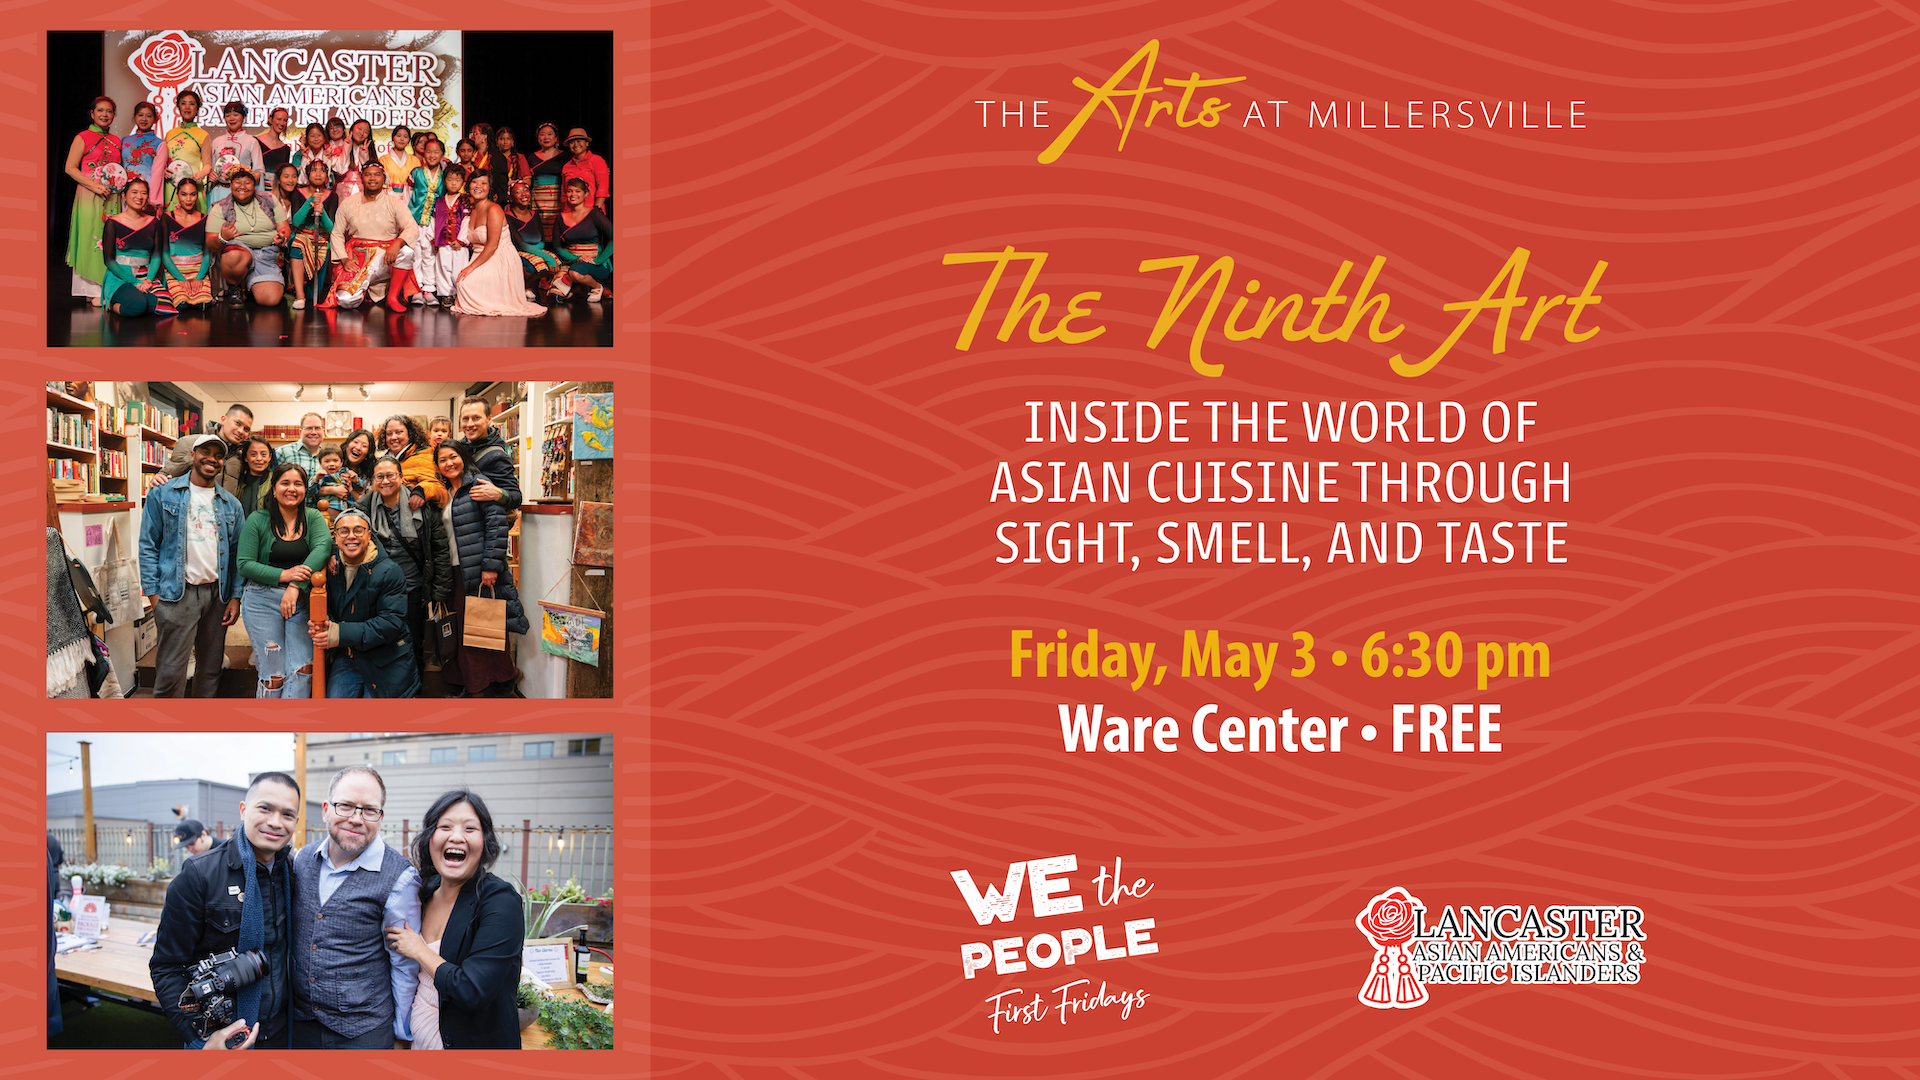 The Arts at Millersville: The Ninth Art: Inside the World of Asian Cuisine Through Sight, Smell, and Taste. Friday, May 3, 6:30 pm. Ware Center. Free. We the People First Fridays. Lancaster AAPI.